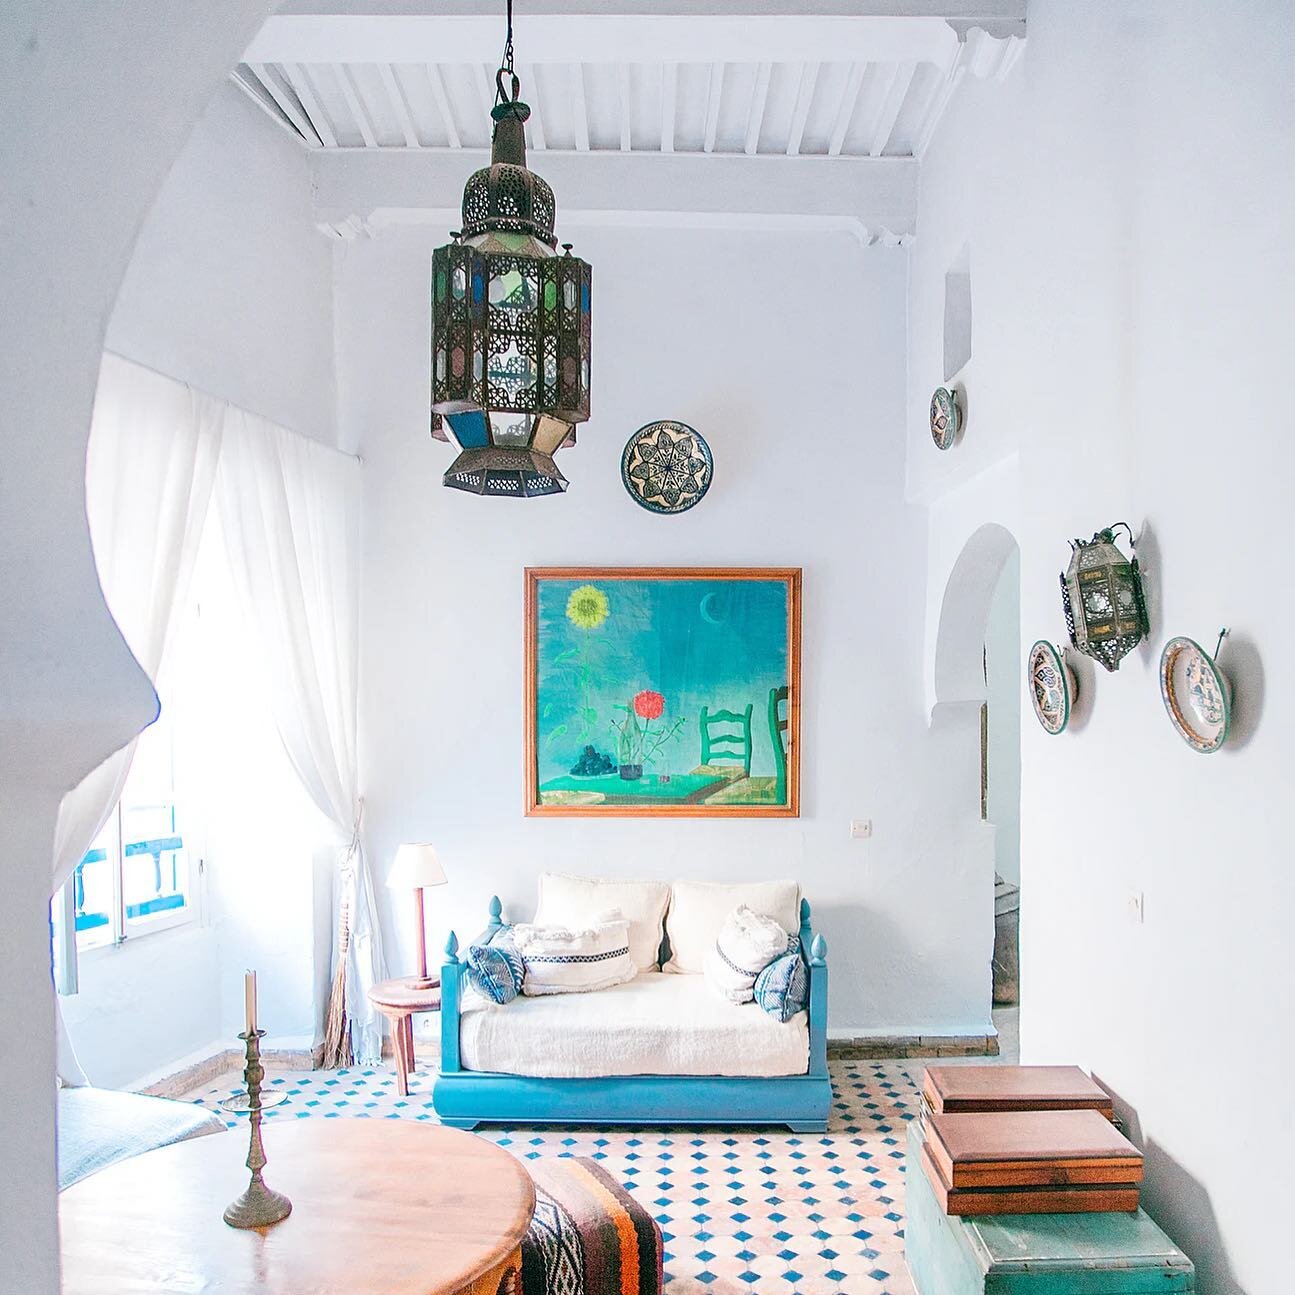 Into the white and shades of blue ✨dreaming✨ of this beautiful interior 
.
.
.
.
 #travel #inspriation #whiteonwhite #blue #morocco #texture #vintage #handmade #traveltheworld